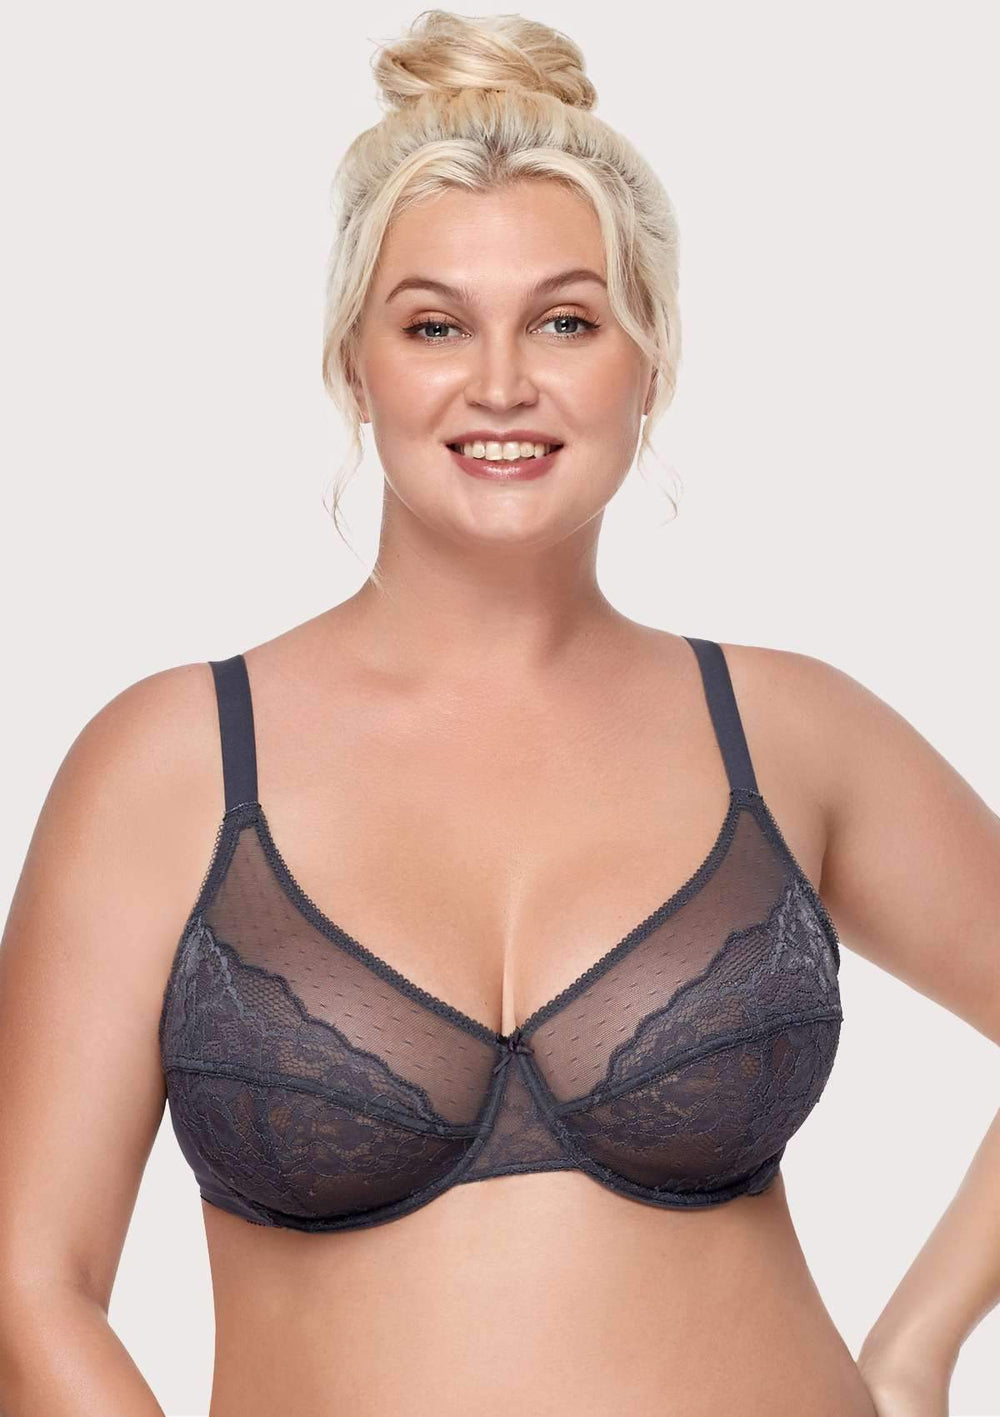 Sexy Lingerie Sets. Full Coverage Overlay Lace Detailed Bra Set. Comfortable,  Underwire Bra, Provides Lift Adjustable Straps -  Canada